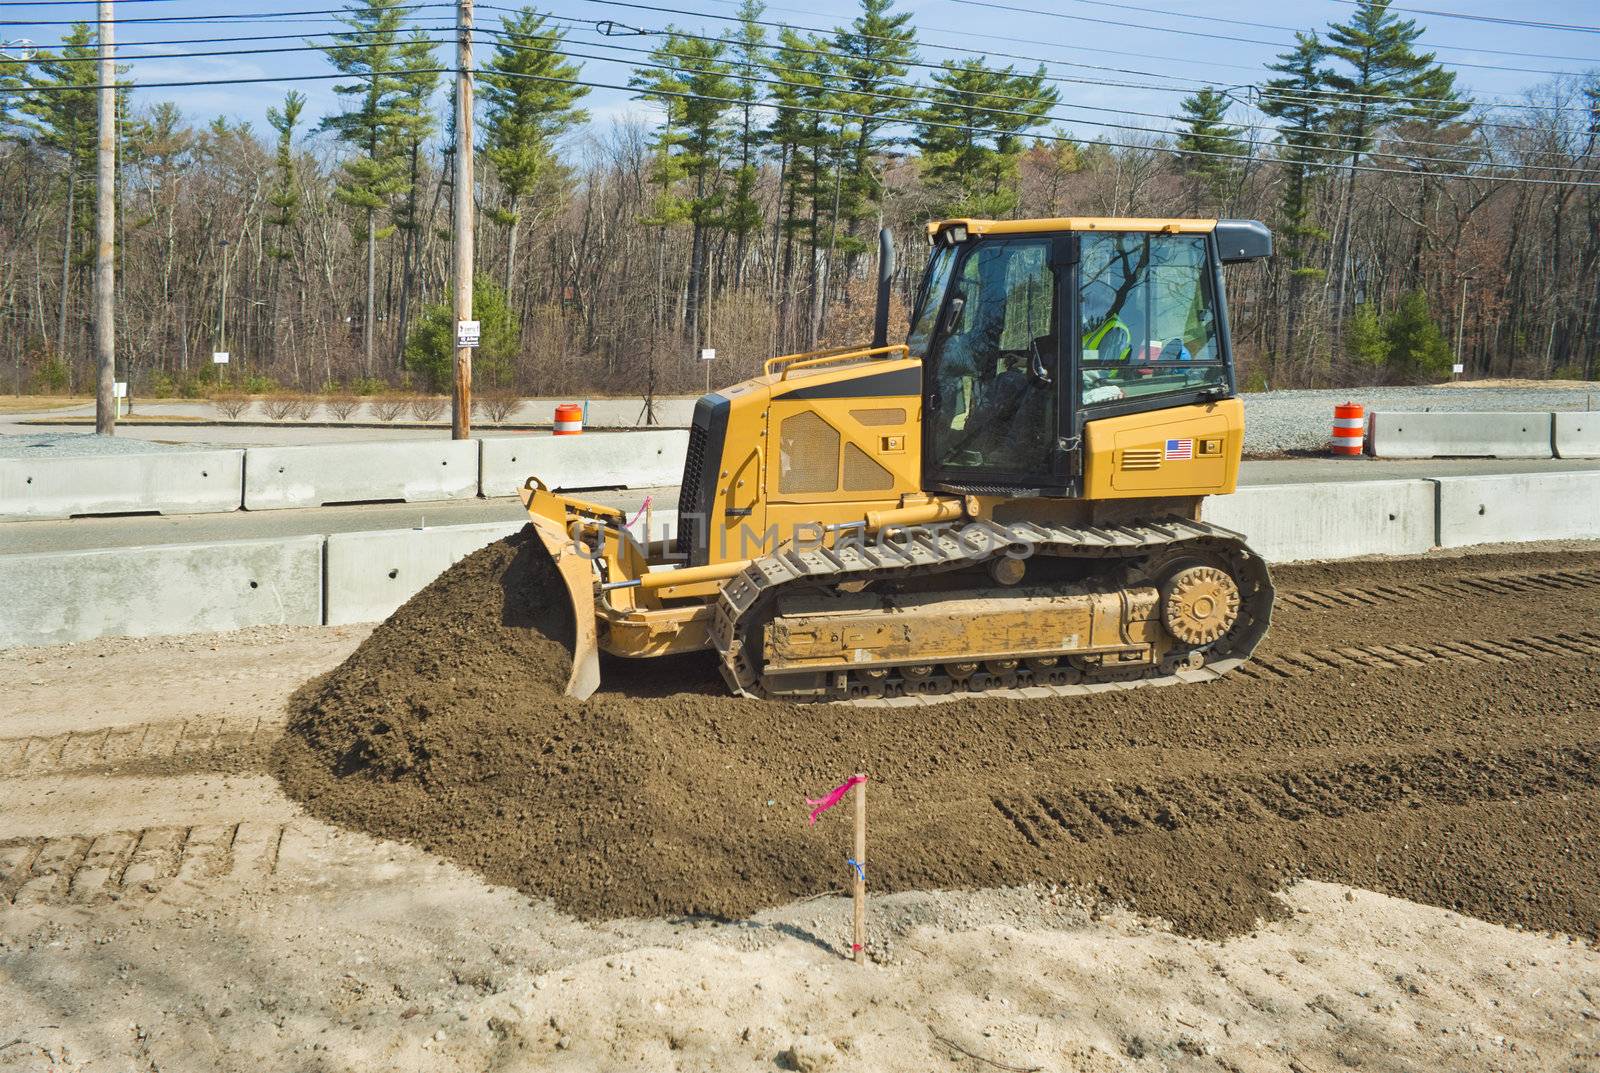 Bulldozer at work on road construction project